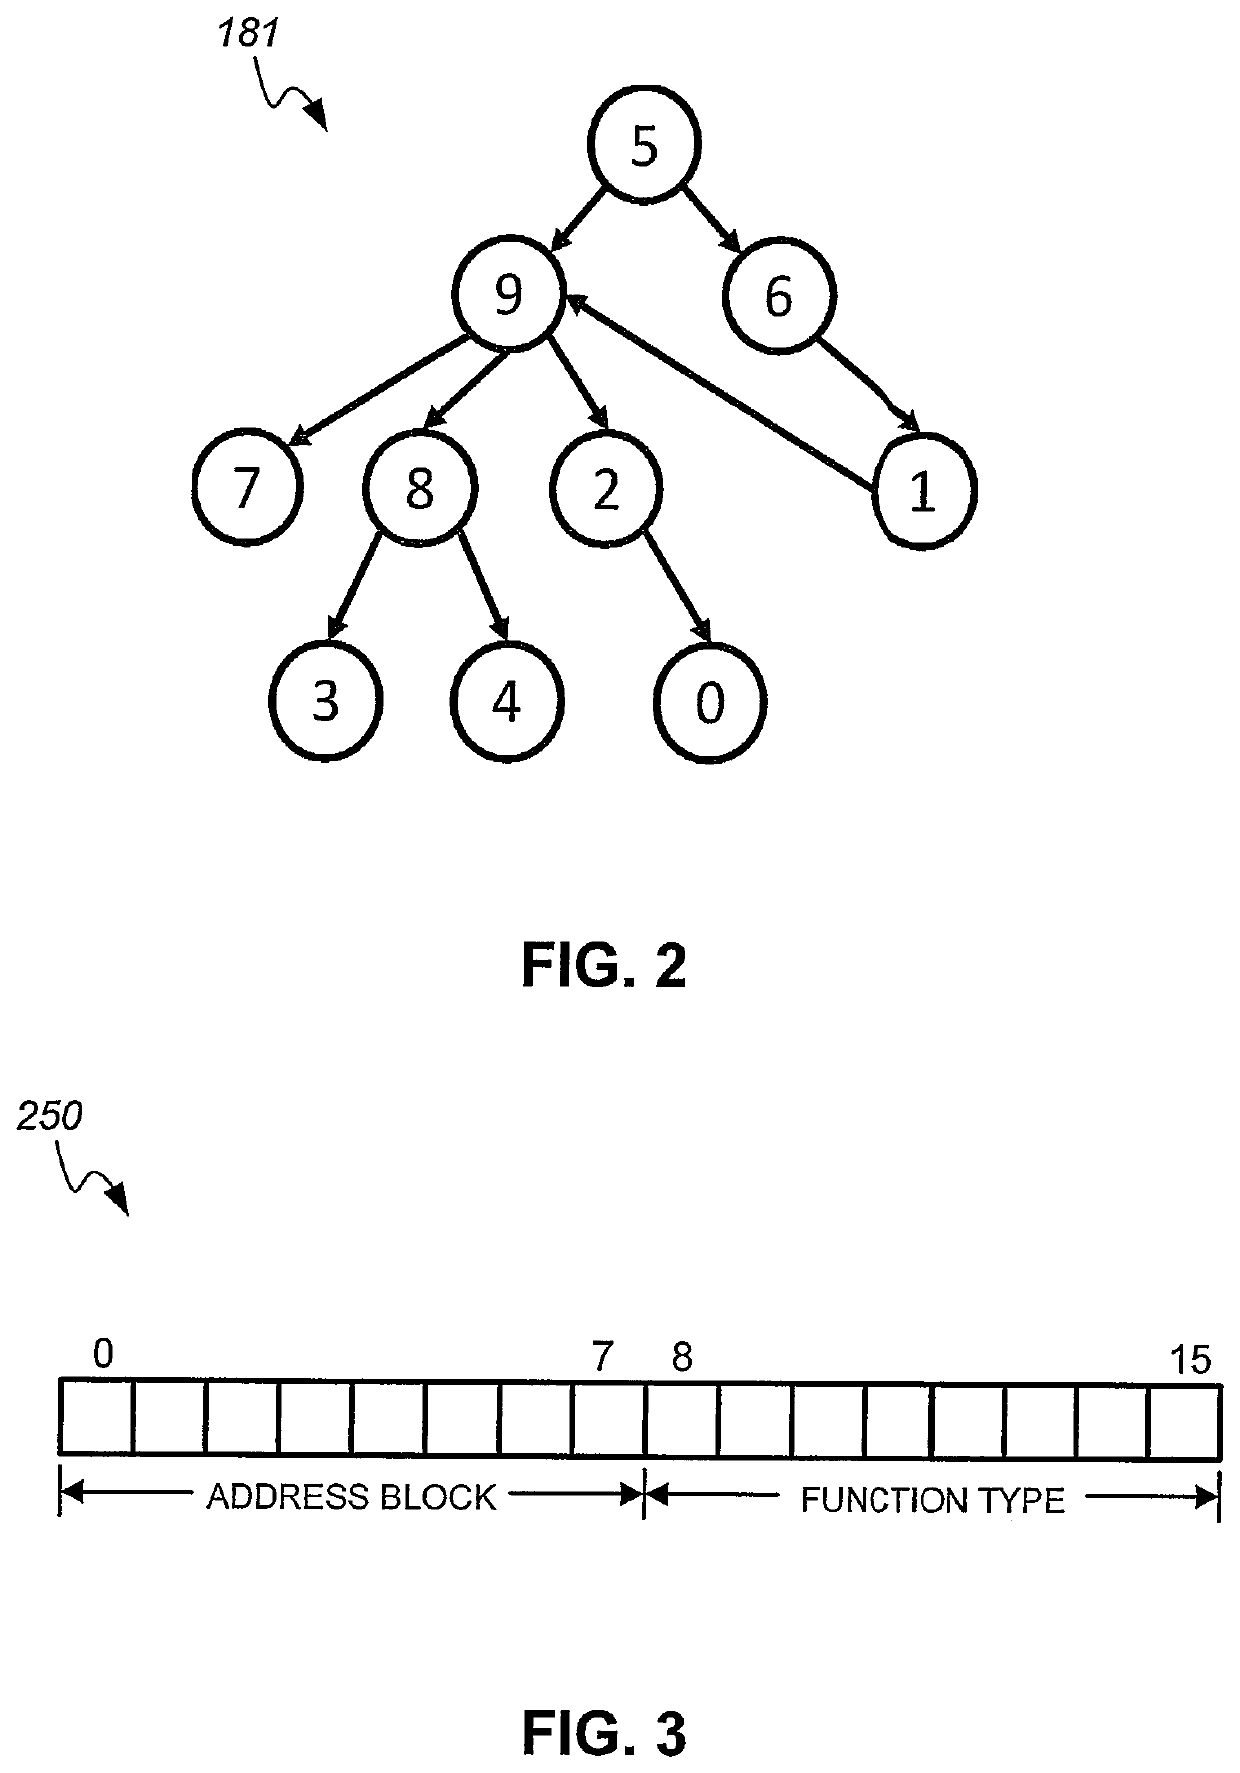 Classification of executable files using a digest of a call graph pattern